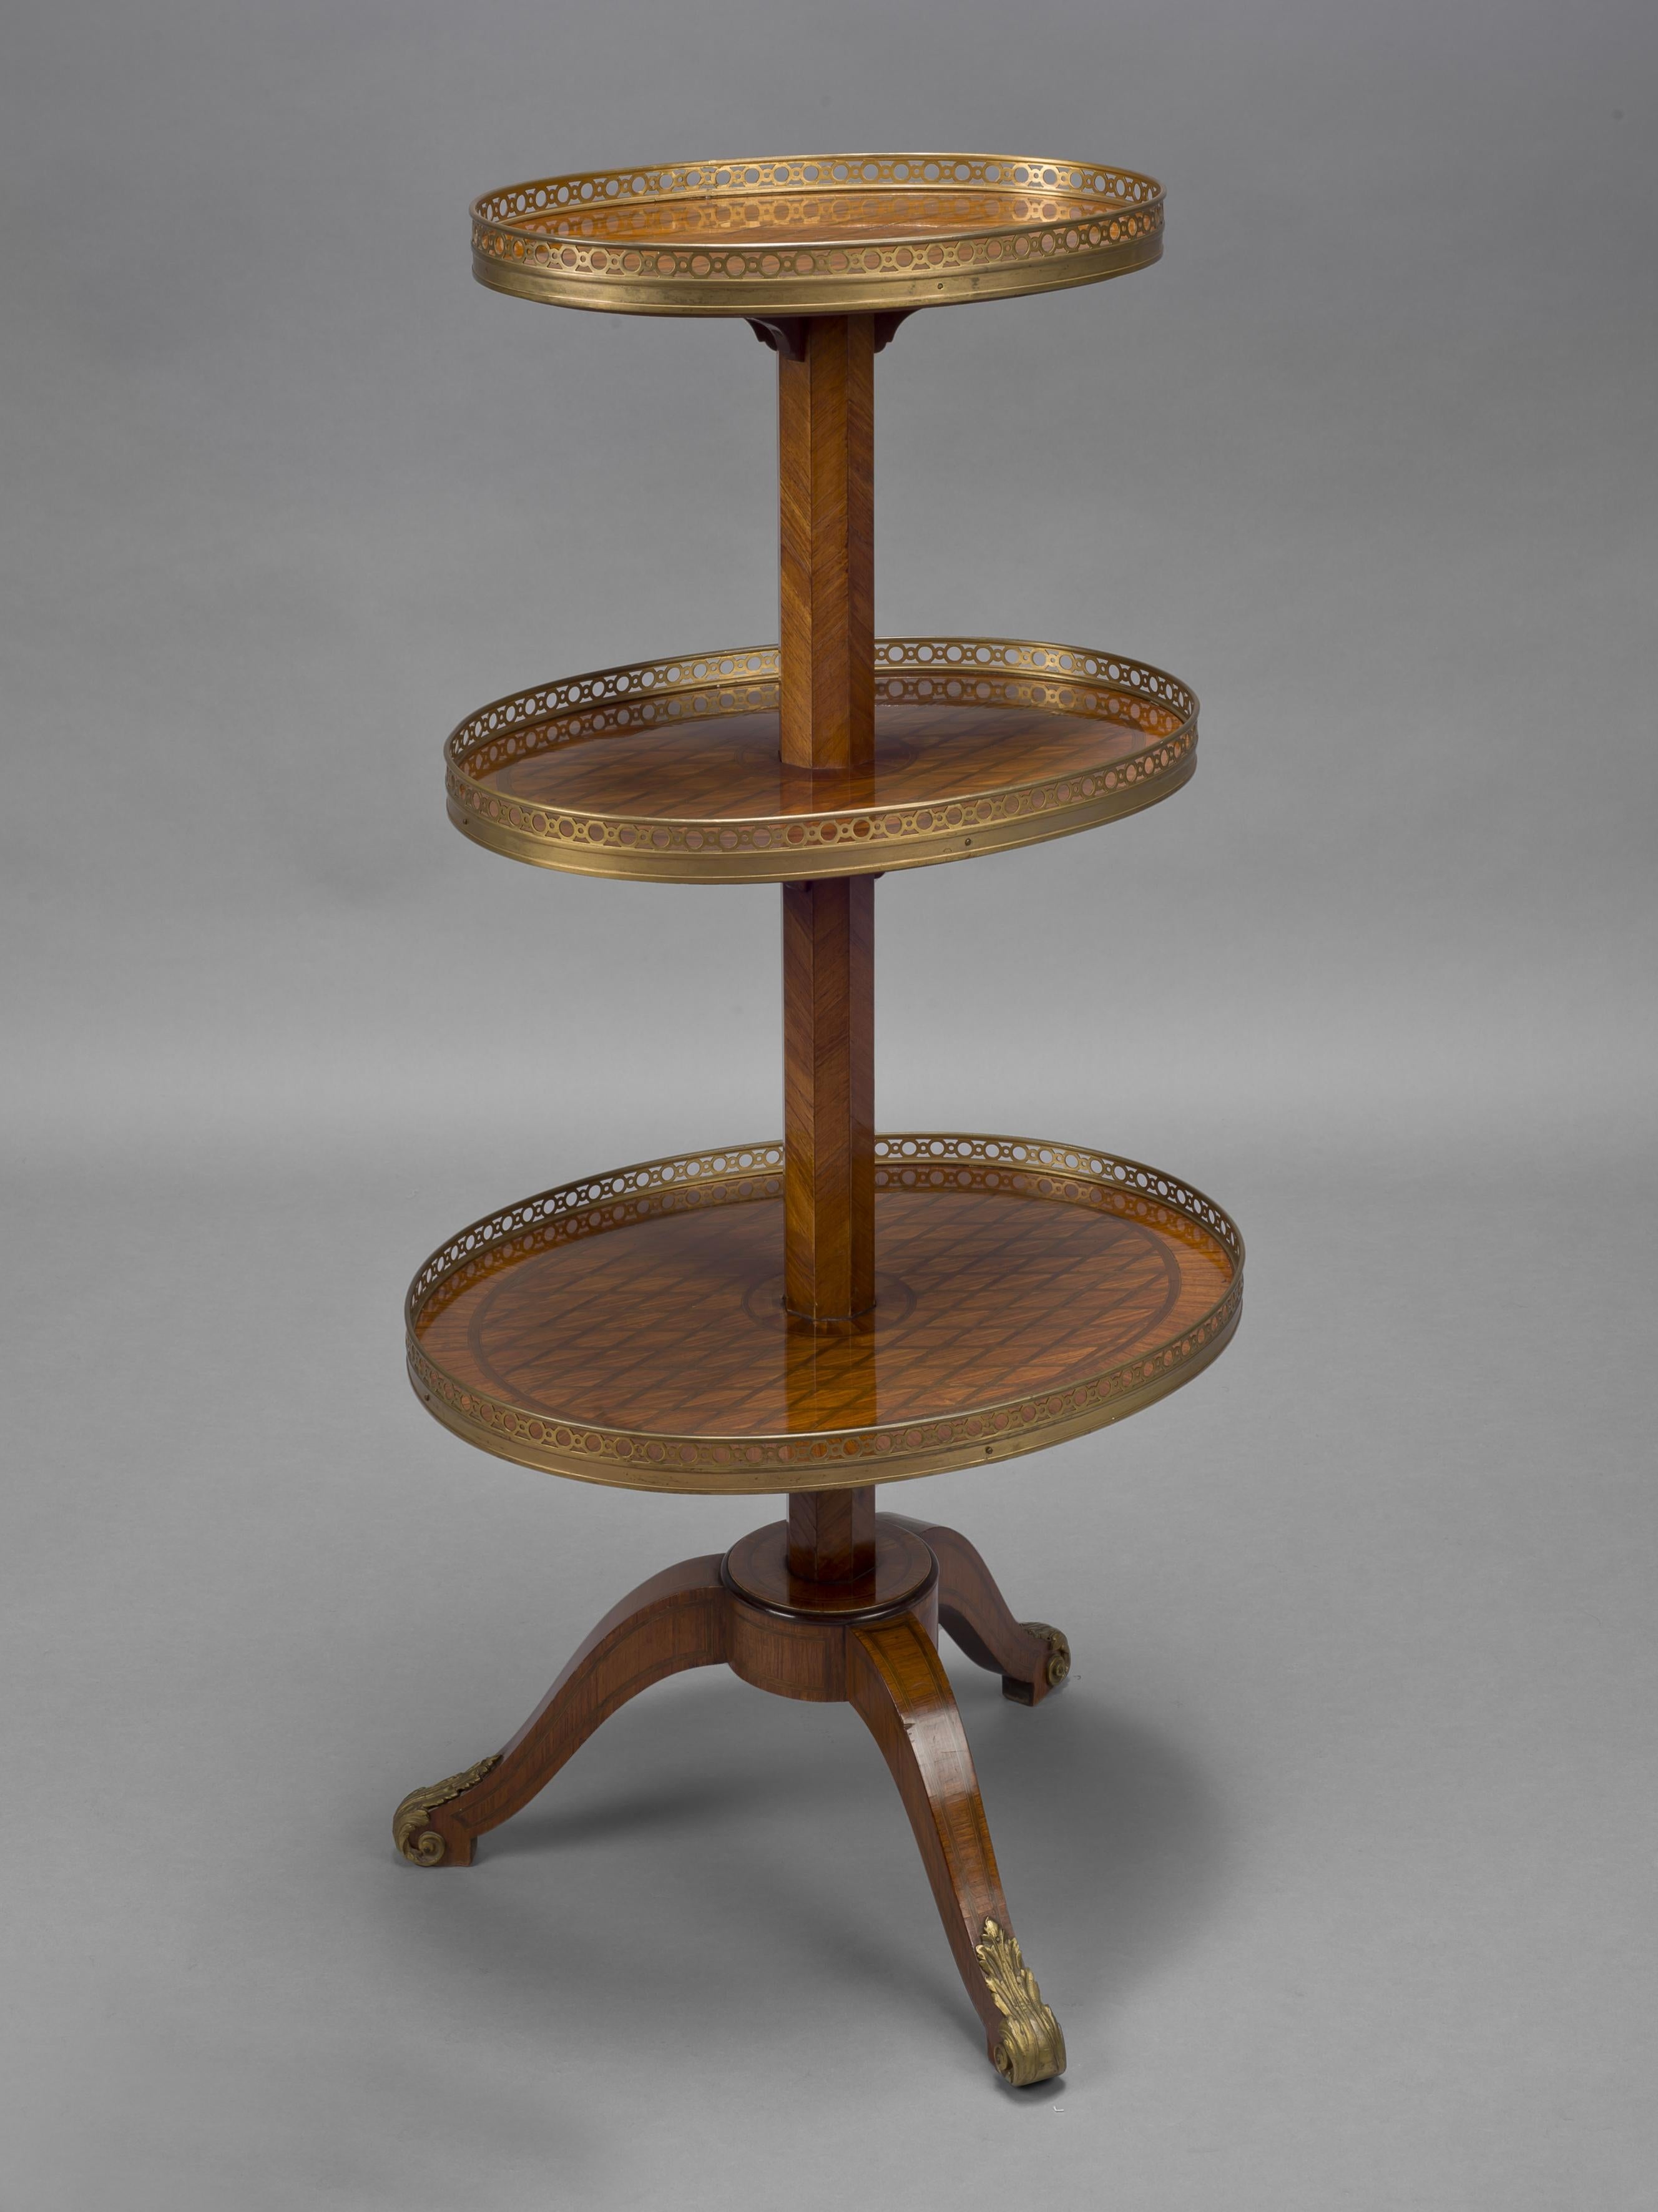 A Fine Louis XVI Style Oval Three Tier Gueridon
After The Model by Simon Phillippe Poirier and Martin Carlin. 

This fine and unusual gueridon has three graduating oval shelves surmounted by a pierced gallery and supported by an octagonal central